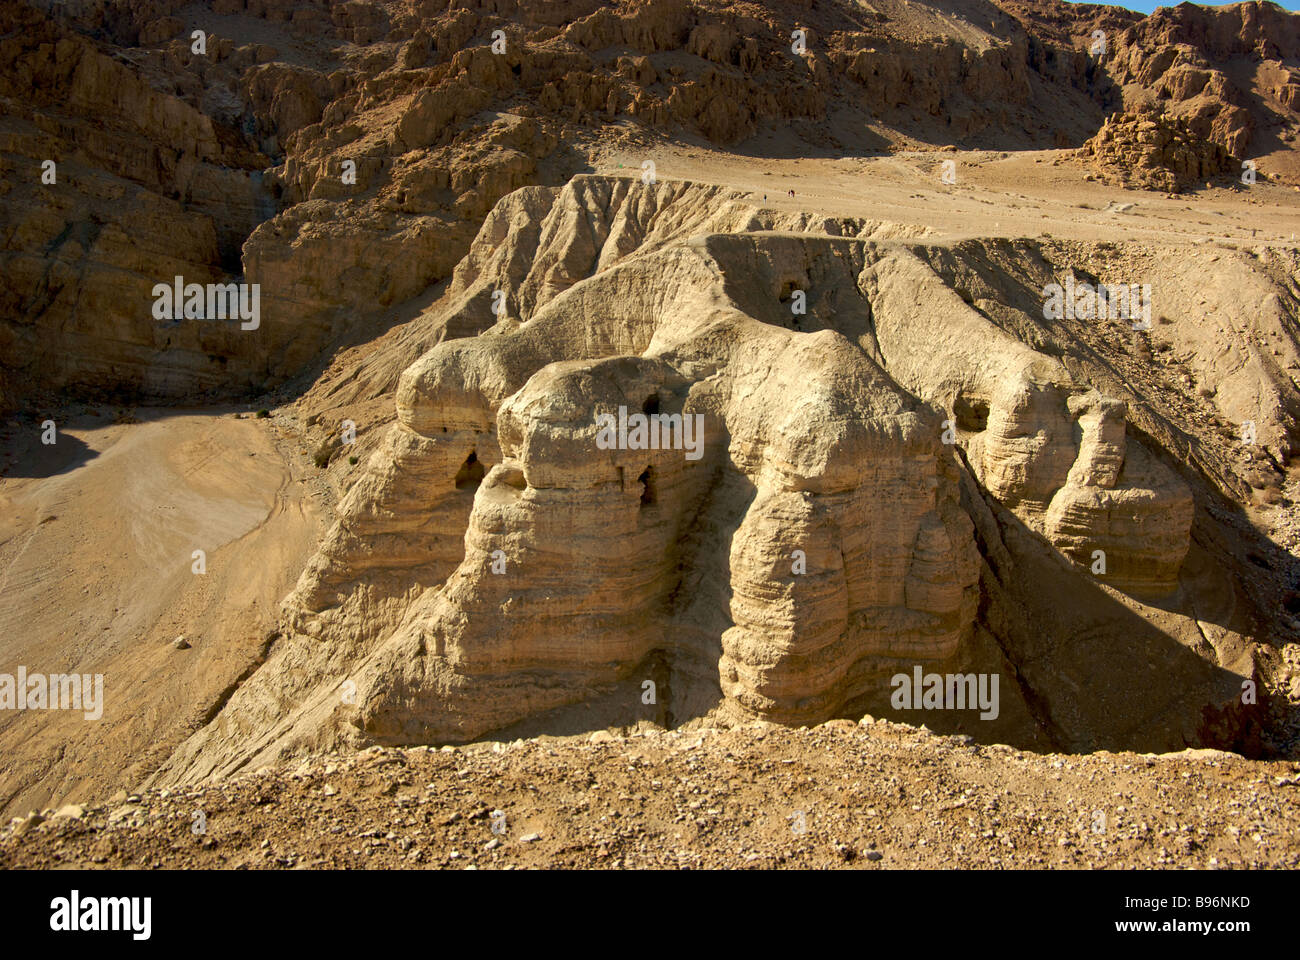 Steep cliffs to entrance of caves where Bedouin shepherds discovered jars containing Dead Sea Scrolls at Qumran National Park Stock Photo